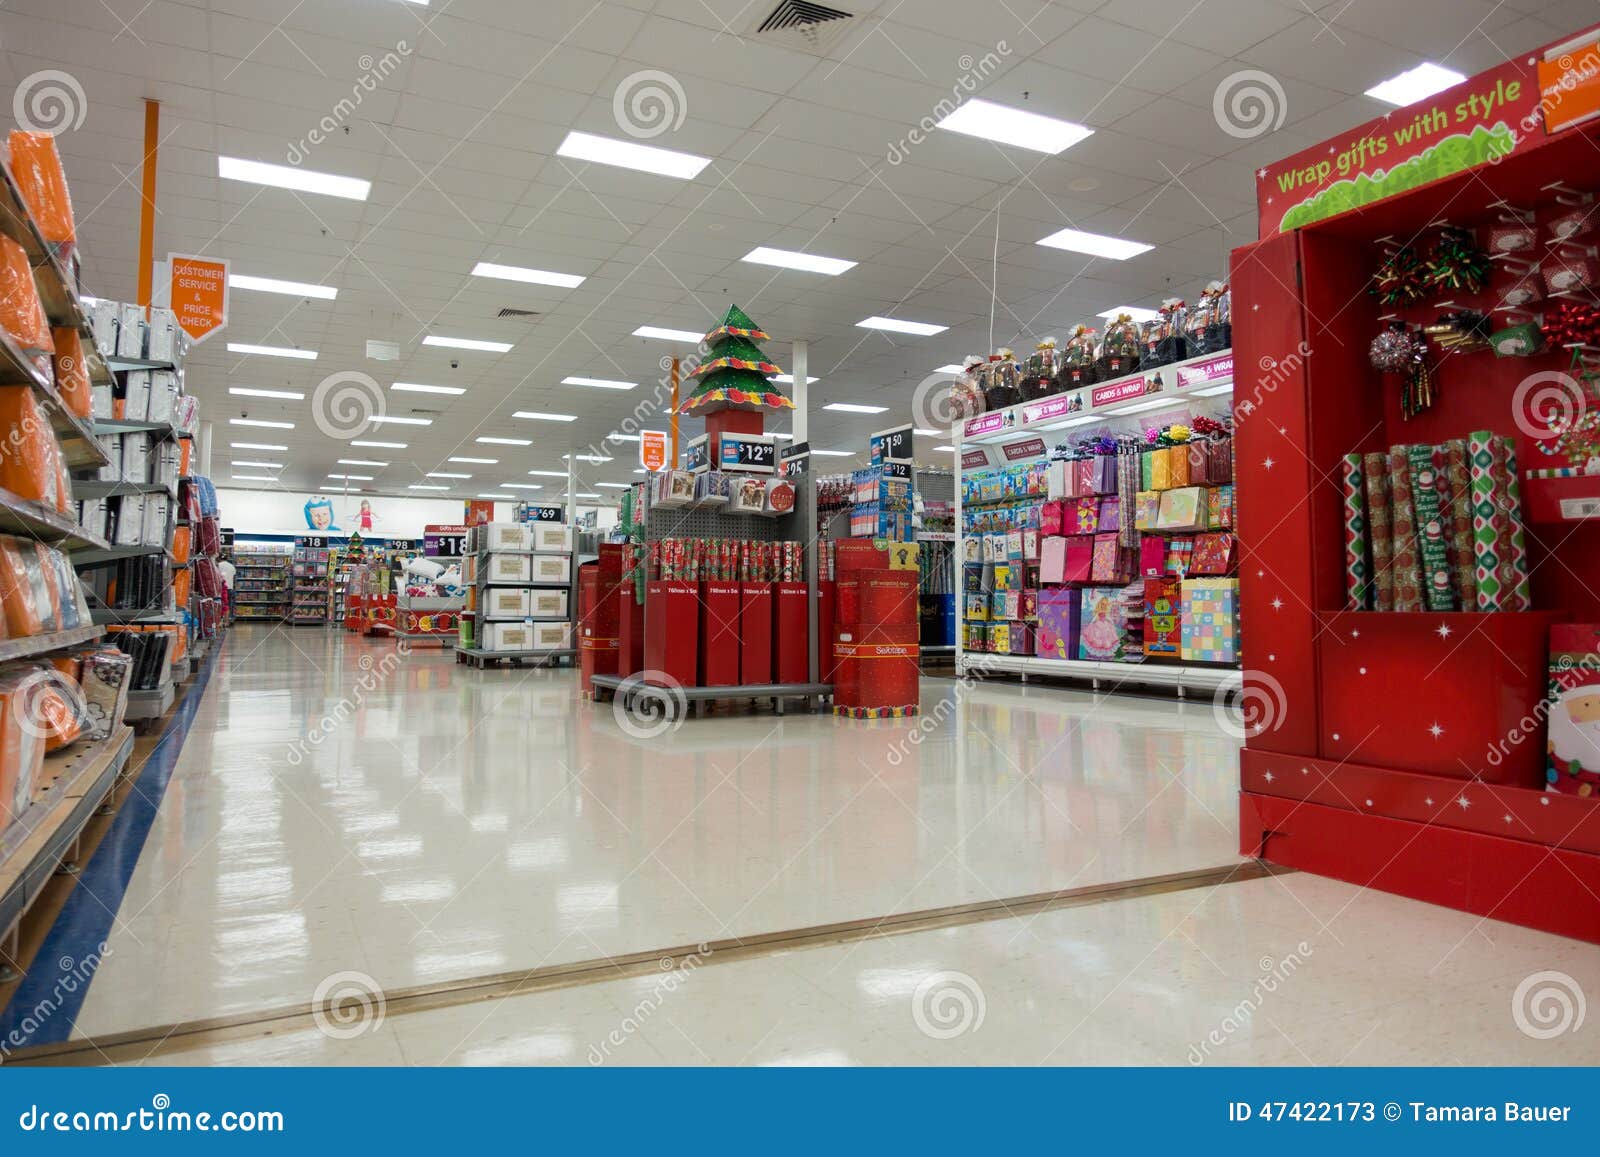 Christmas Decorations, Big W Superstore Editorial Stock Photo ...